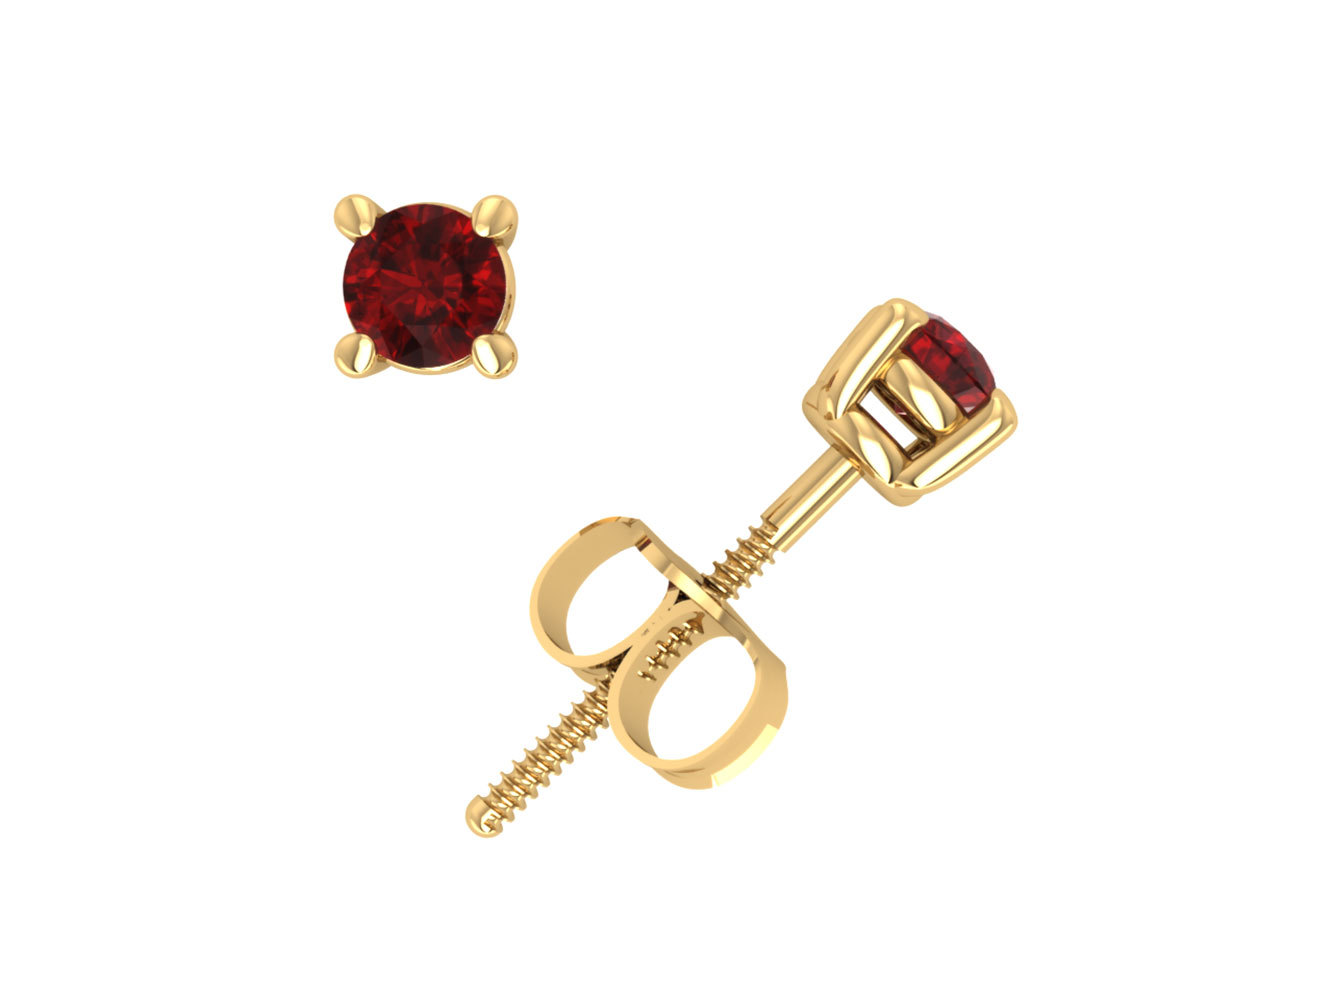 Jewel We Sell Genuine 0.33Carat Round Cut Ruby Basket Stud Earrings 14k White or Yellow Gold ScrewBack Commercial Quality